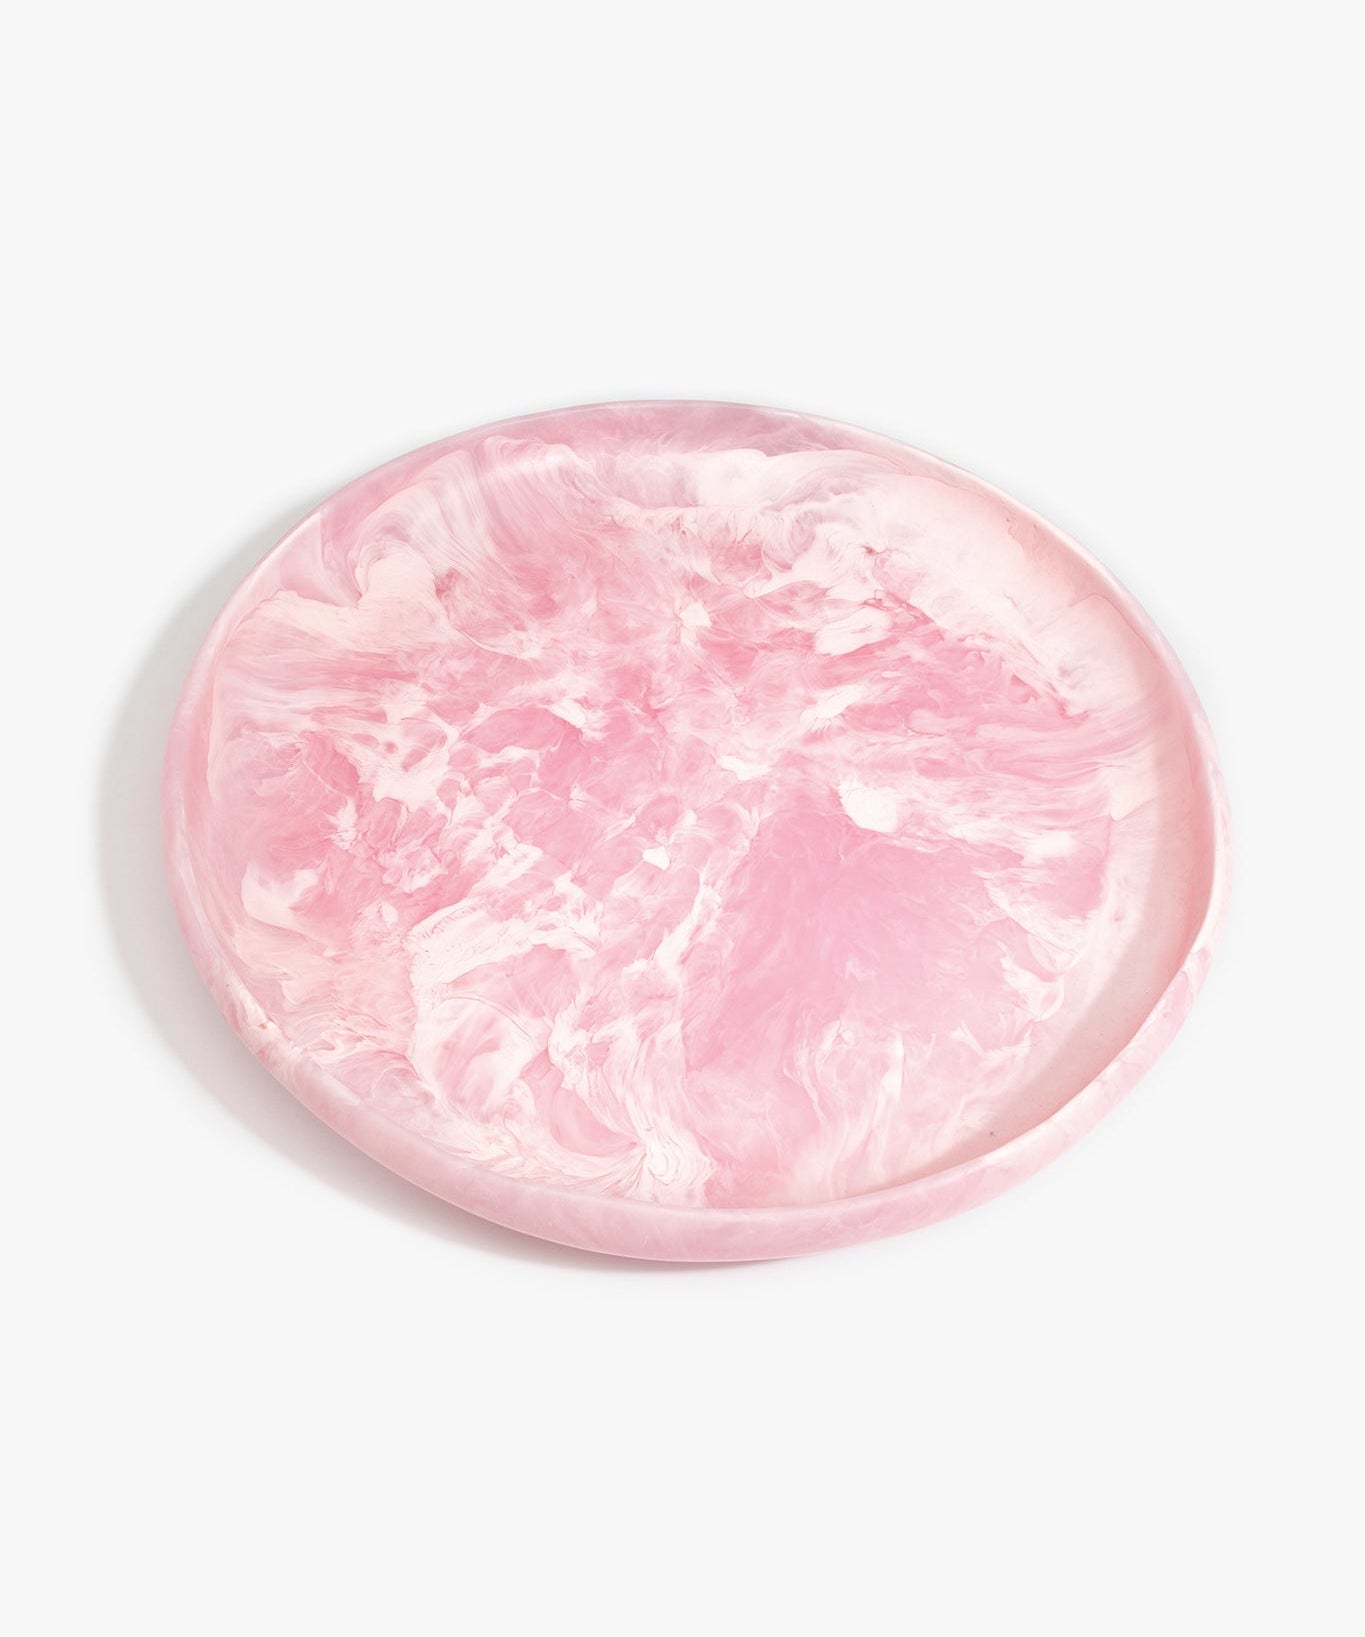 Dinosaur Designs Extra Large Earth Bowl Bowls in Shell Pink color resin